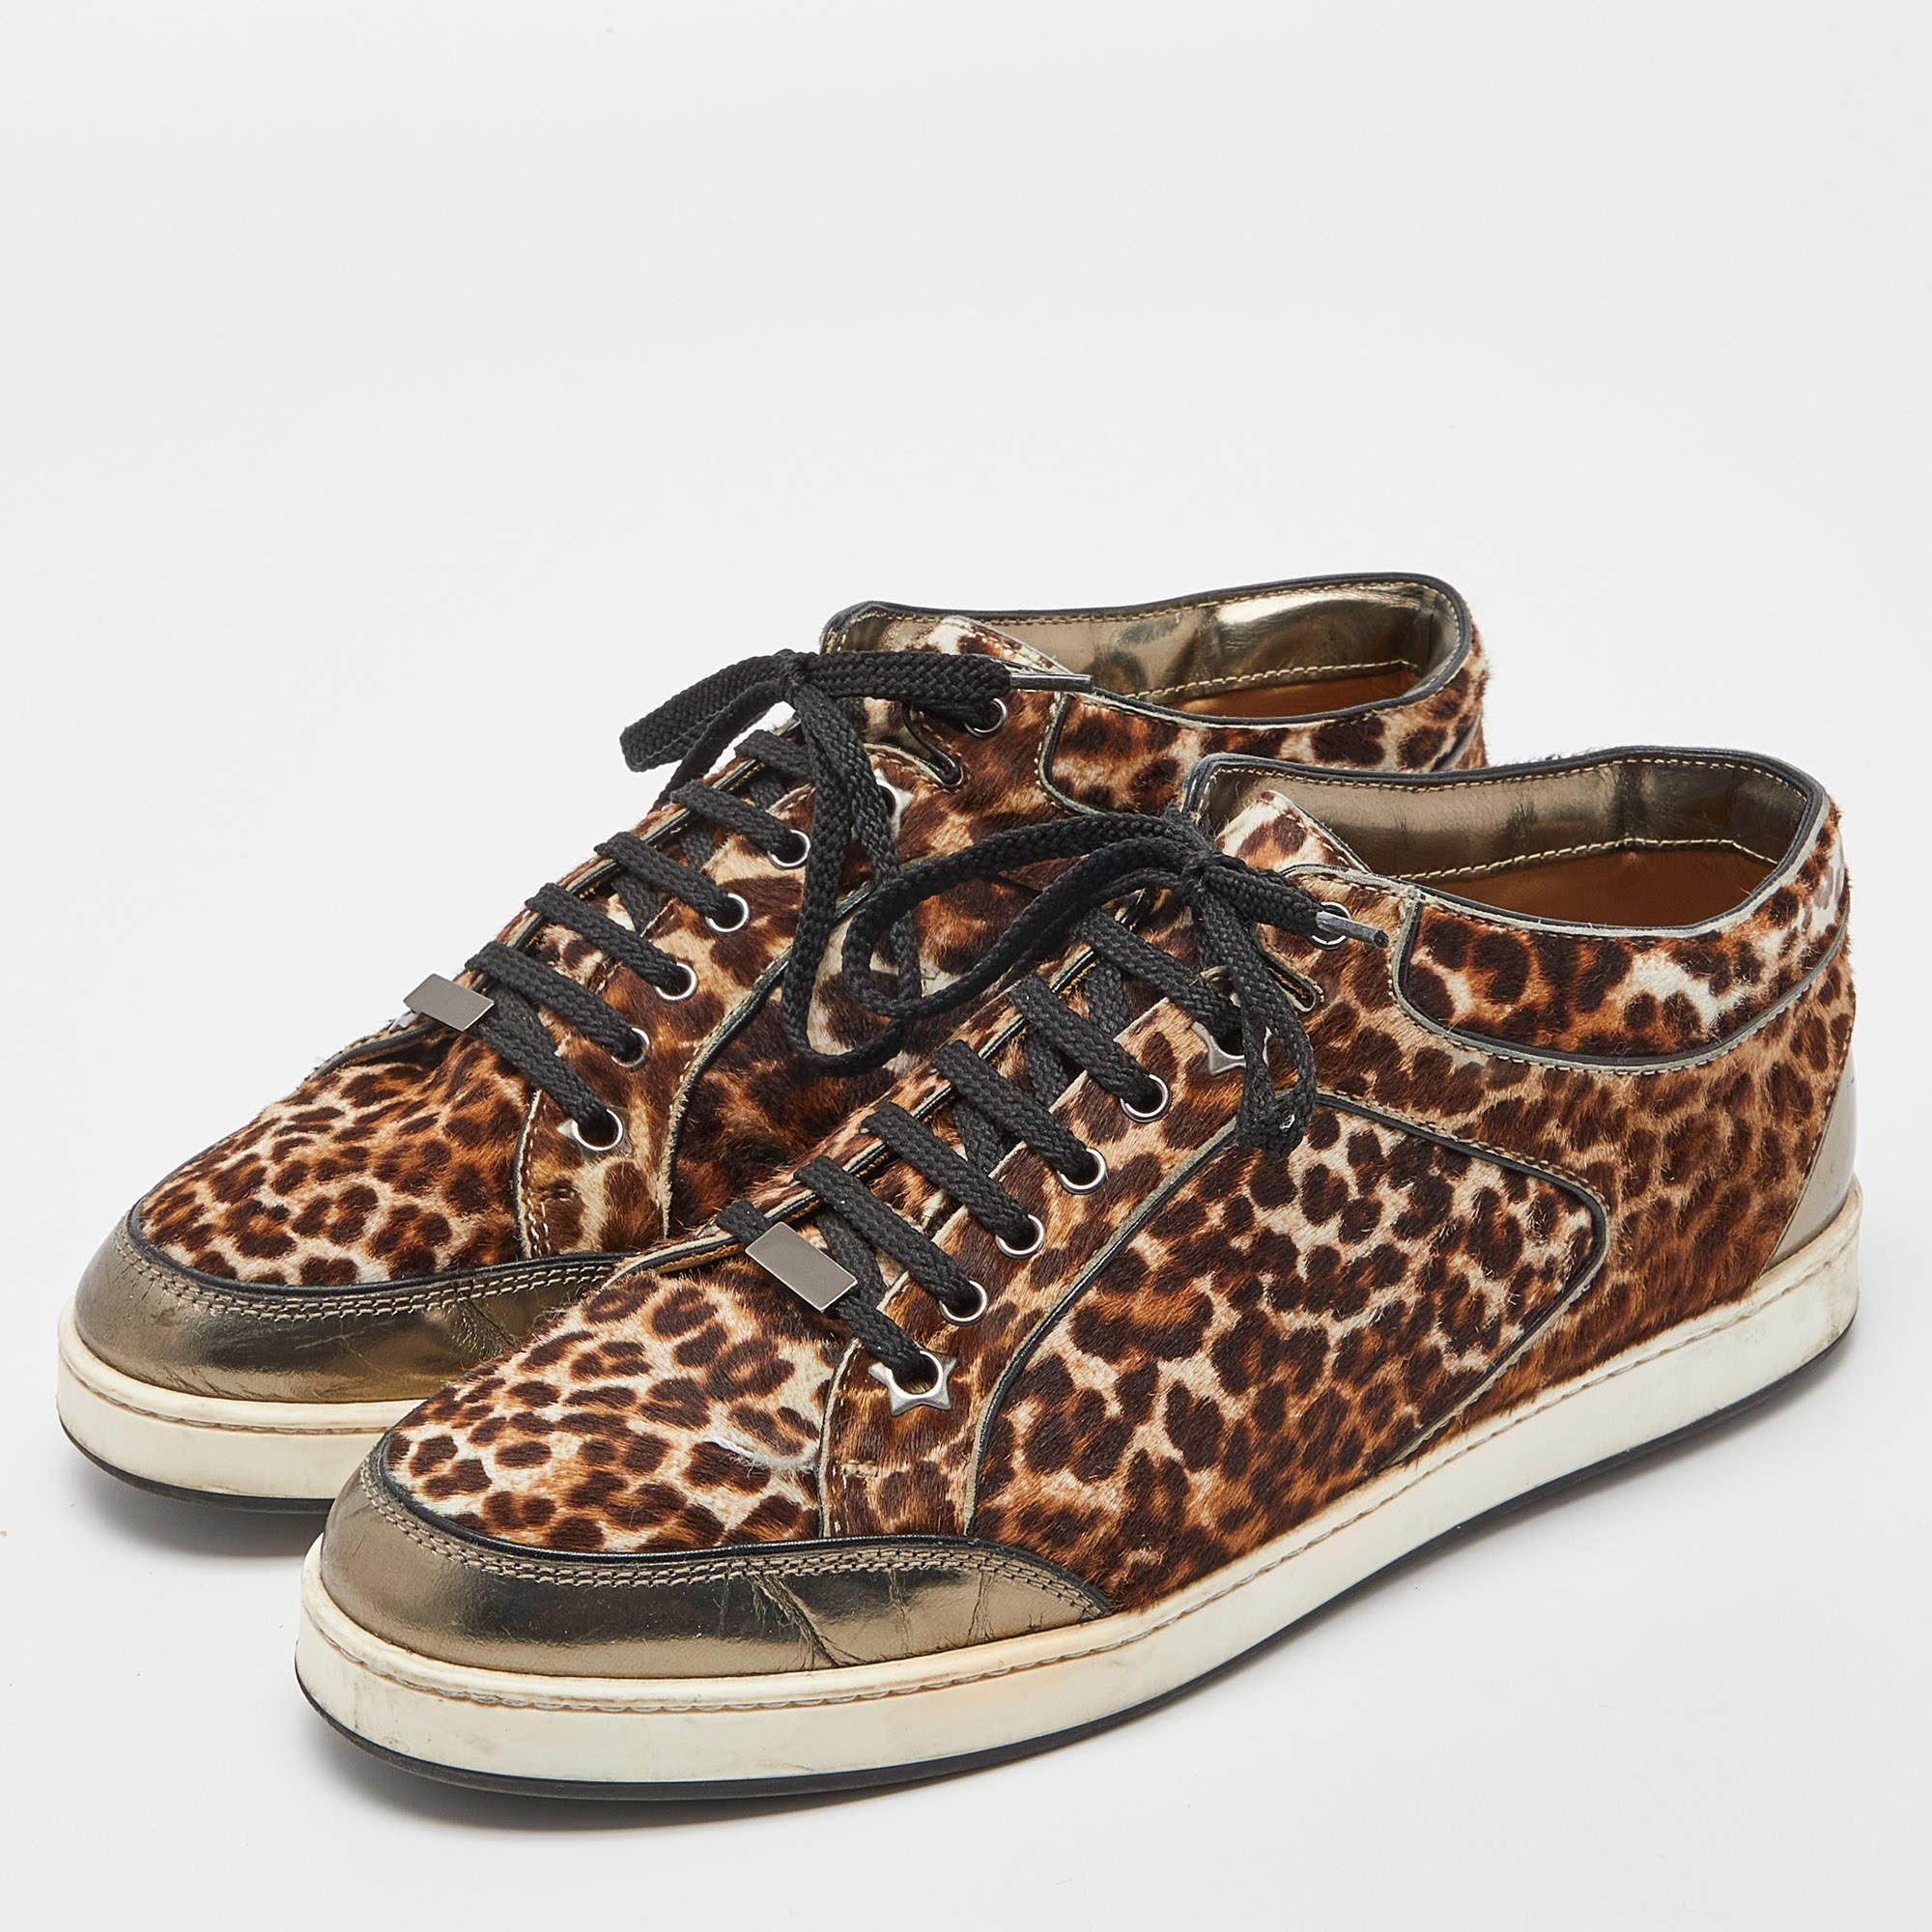 Add a statement appeal to your outfit with these Jimmy Choo sneakers. Made from premium materials, they feature lace-up vamps and relaxing footbeds. The rubber sole of this pair aims to provide you with everyday ease.

